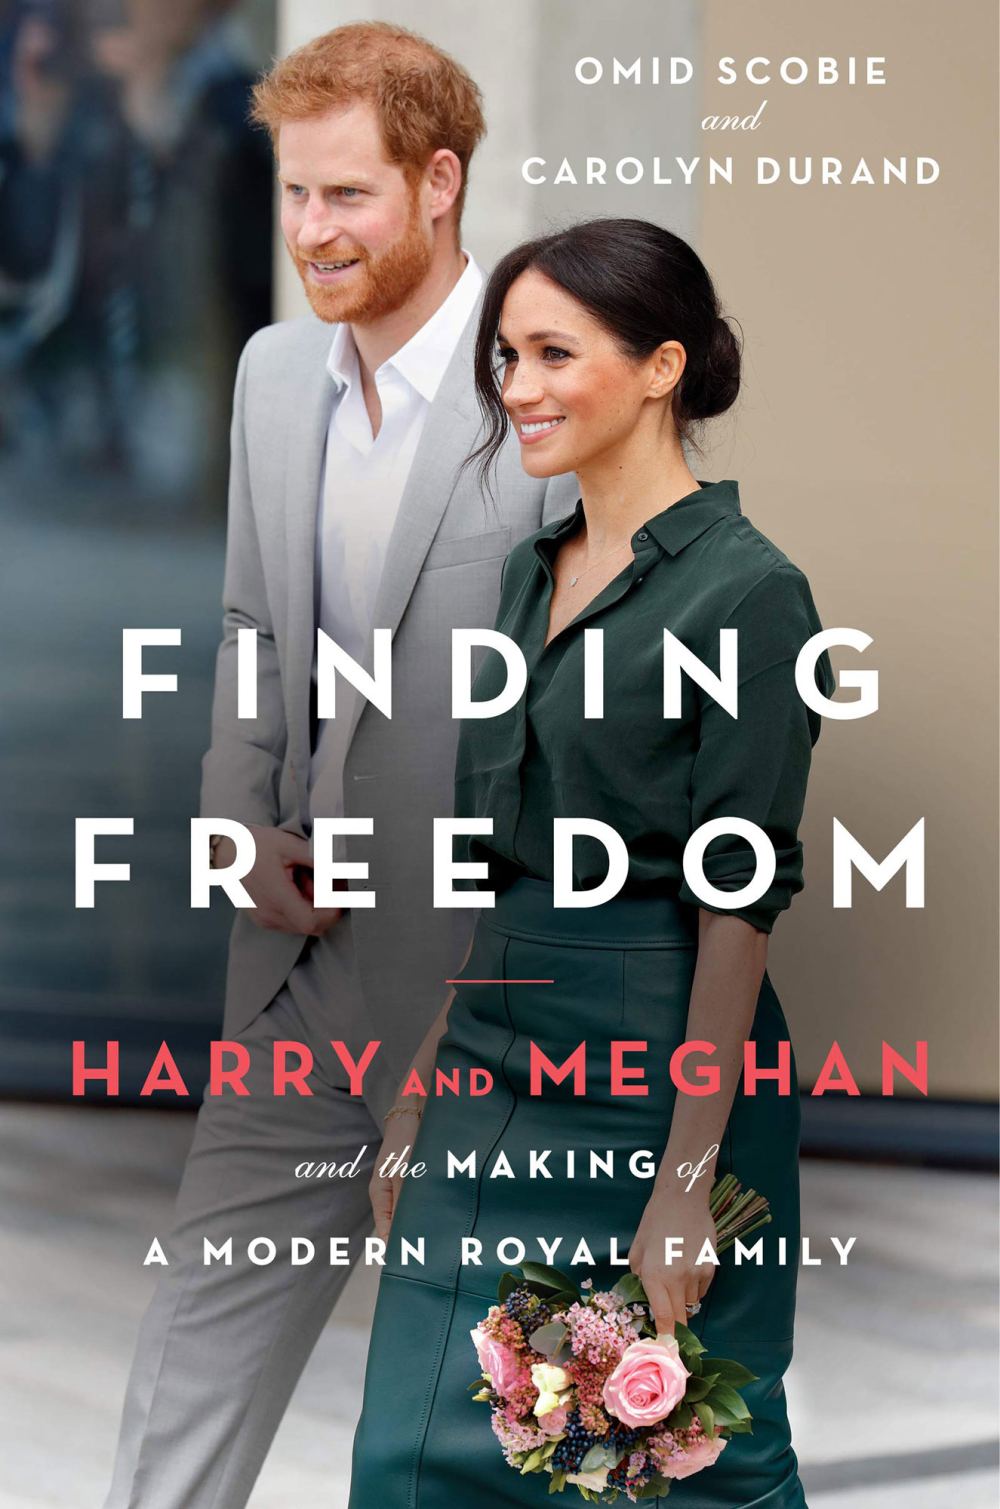 Finding Freedom Book Has Made Prince William Prince Harry Relationship Worse